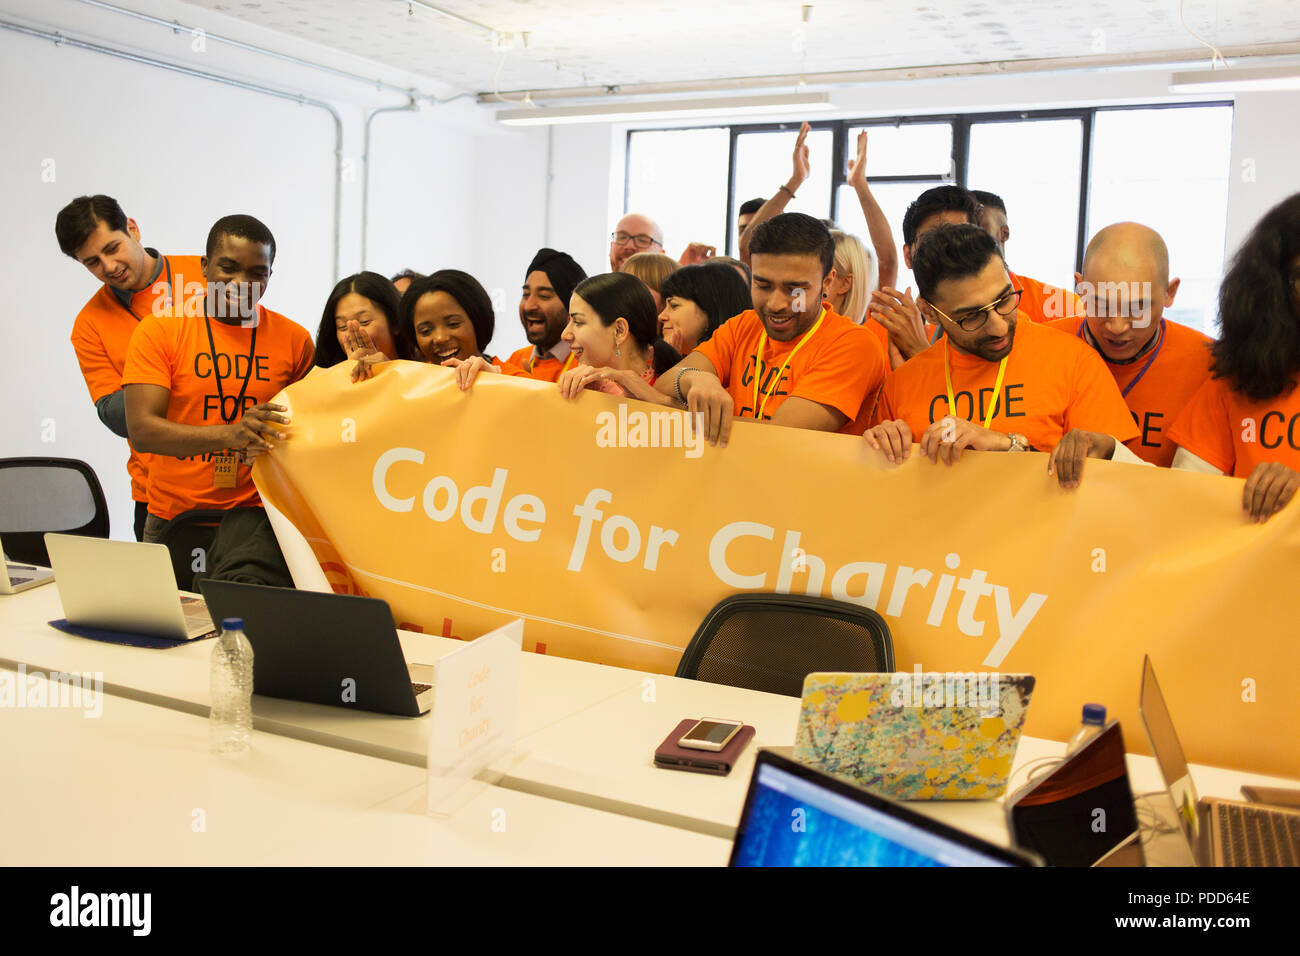 Hackers with banner coding for charity at hackathon Stock Photo